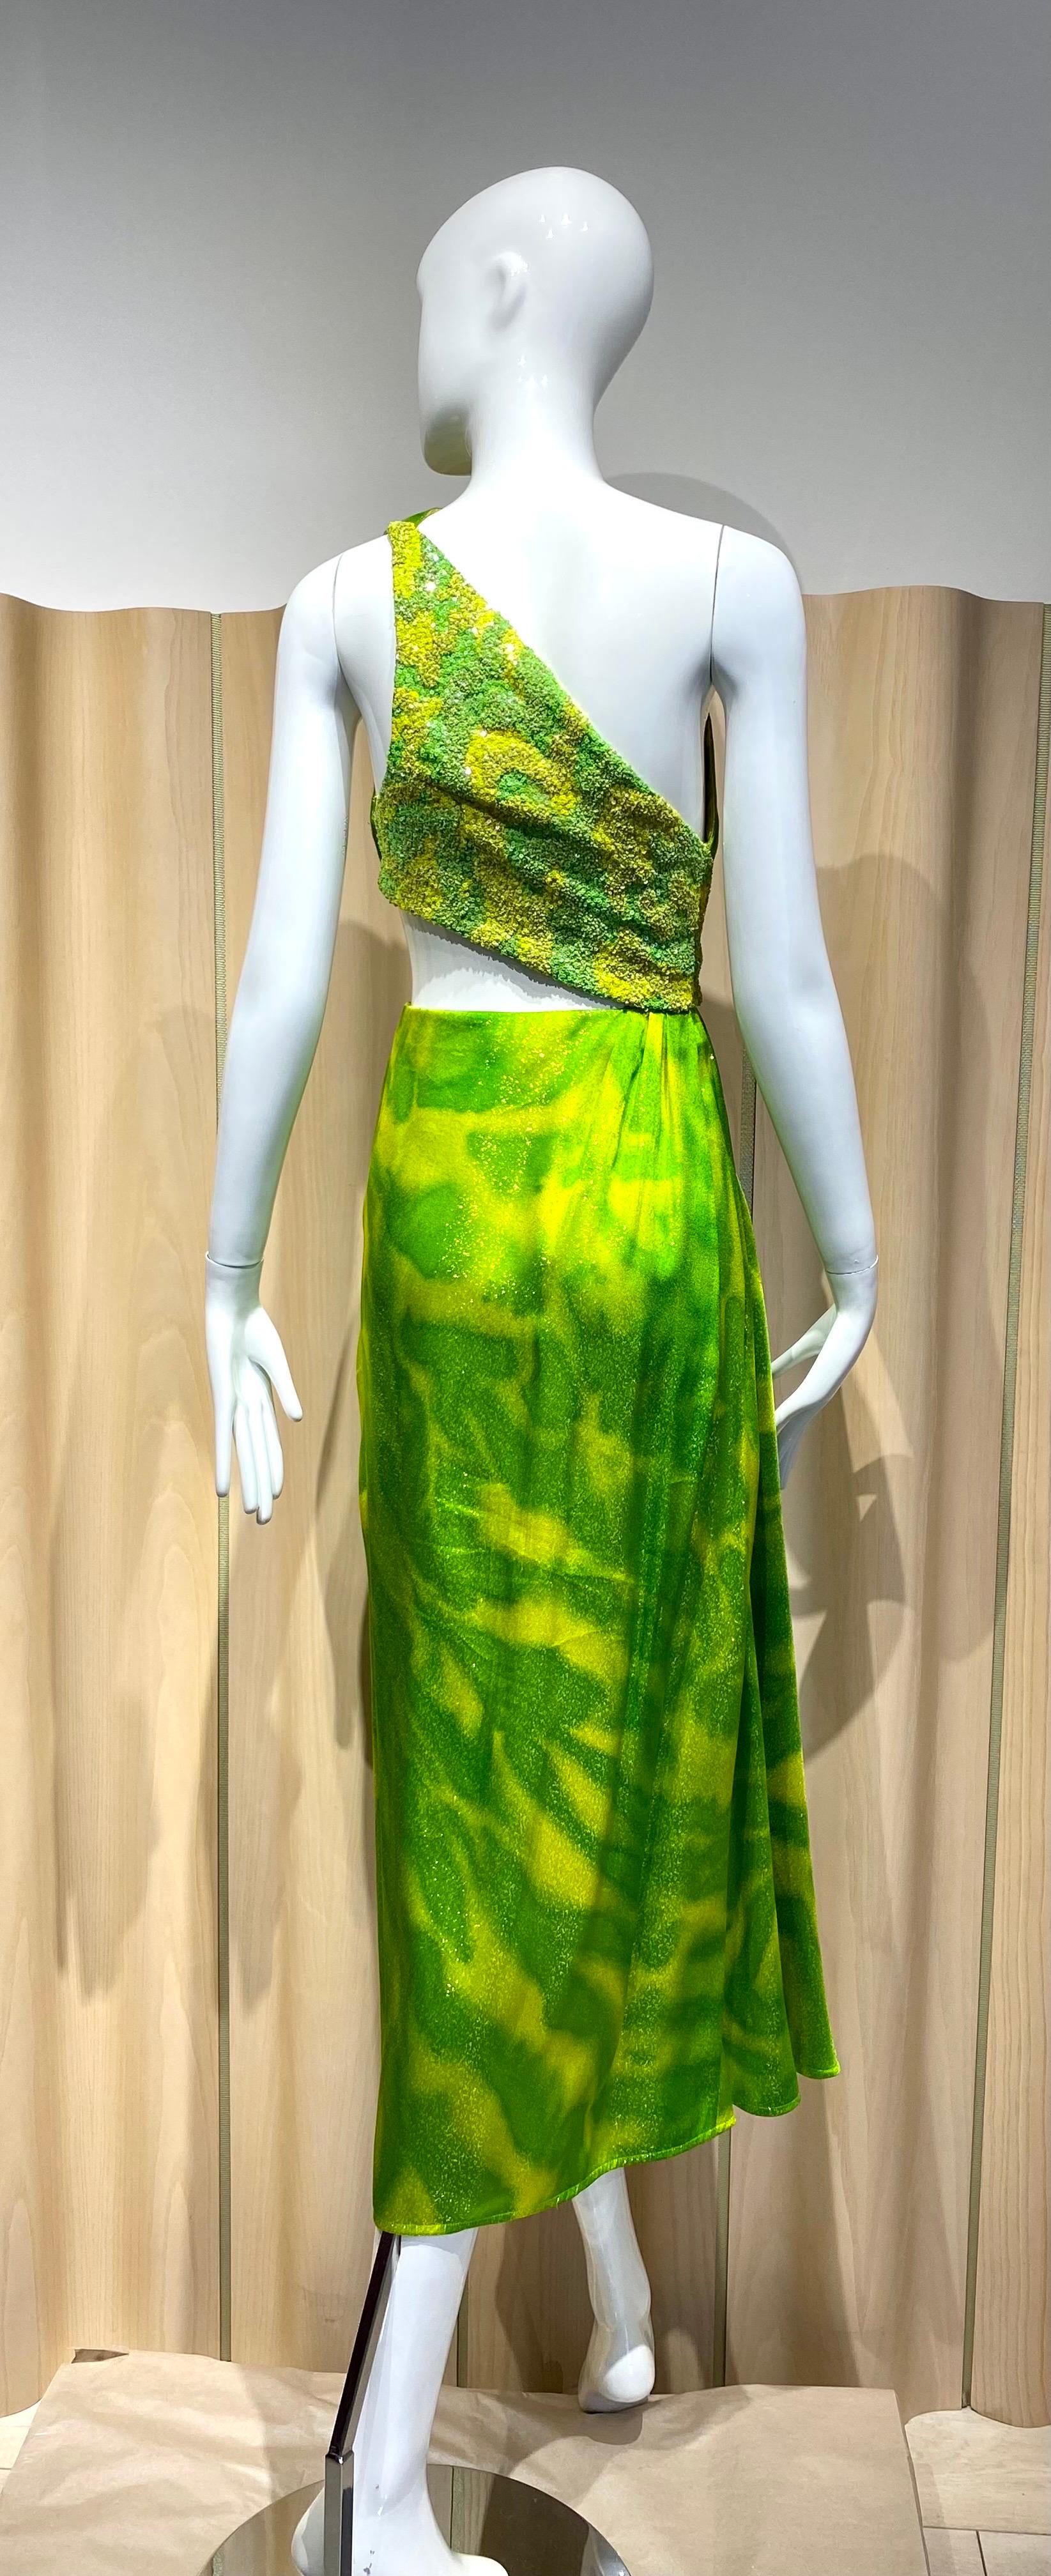 1992 Geoffrey Beene Lime green chartreuse print Grecian cut out gown with multi color sequins.
see runway photo attached.
Marked size 4 but it fit size modern size 2 
Measurement: Bust 32.5” / Waist 24.5” / Dress length 50.5”
